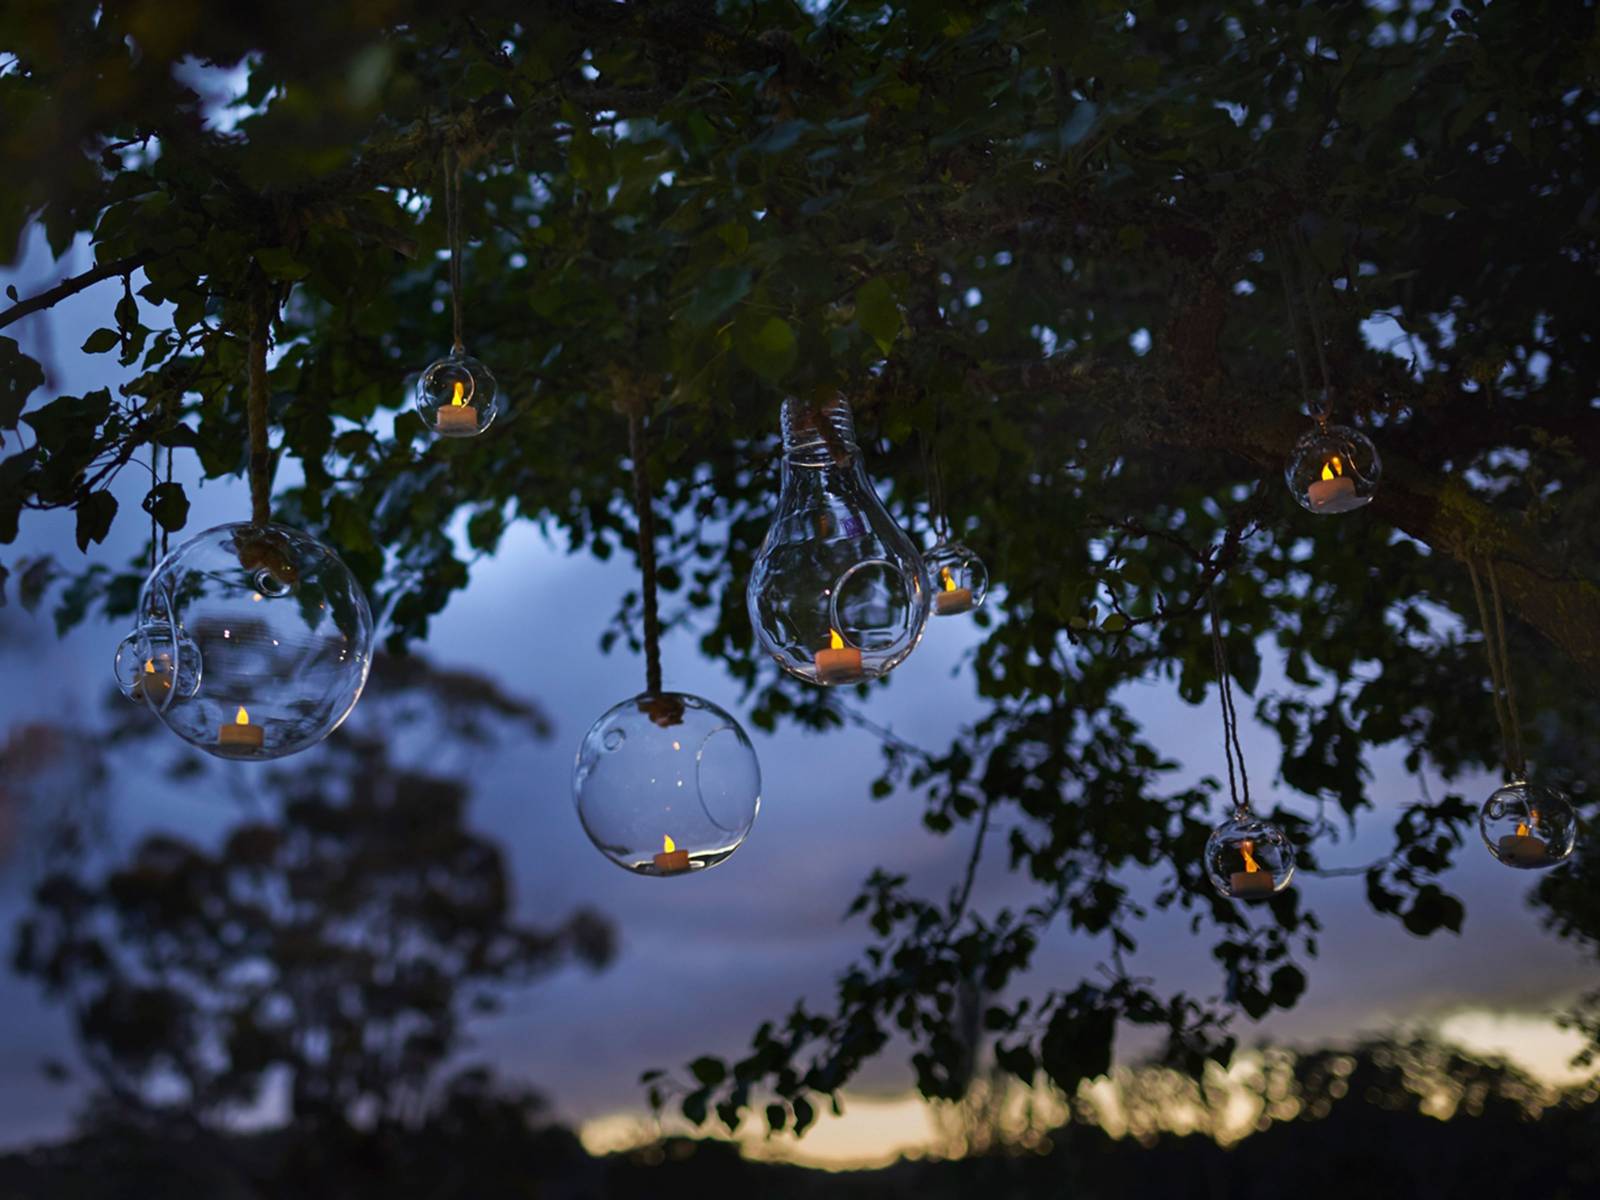 Glass globes with tealight candles hanging from trees at sunset.